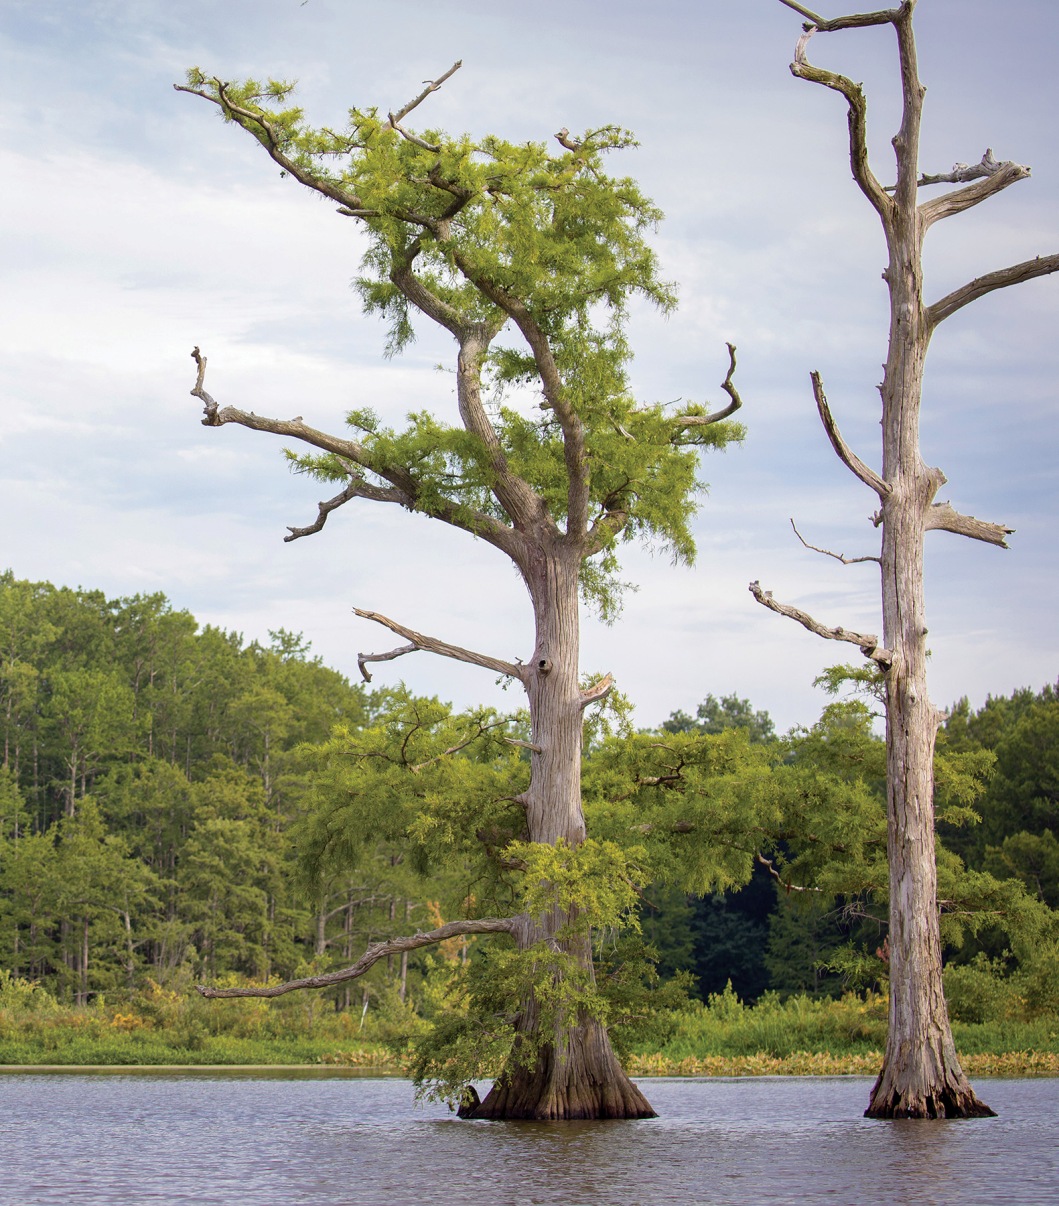 An image of an unhealthy wetland tree submerged in water